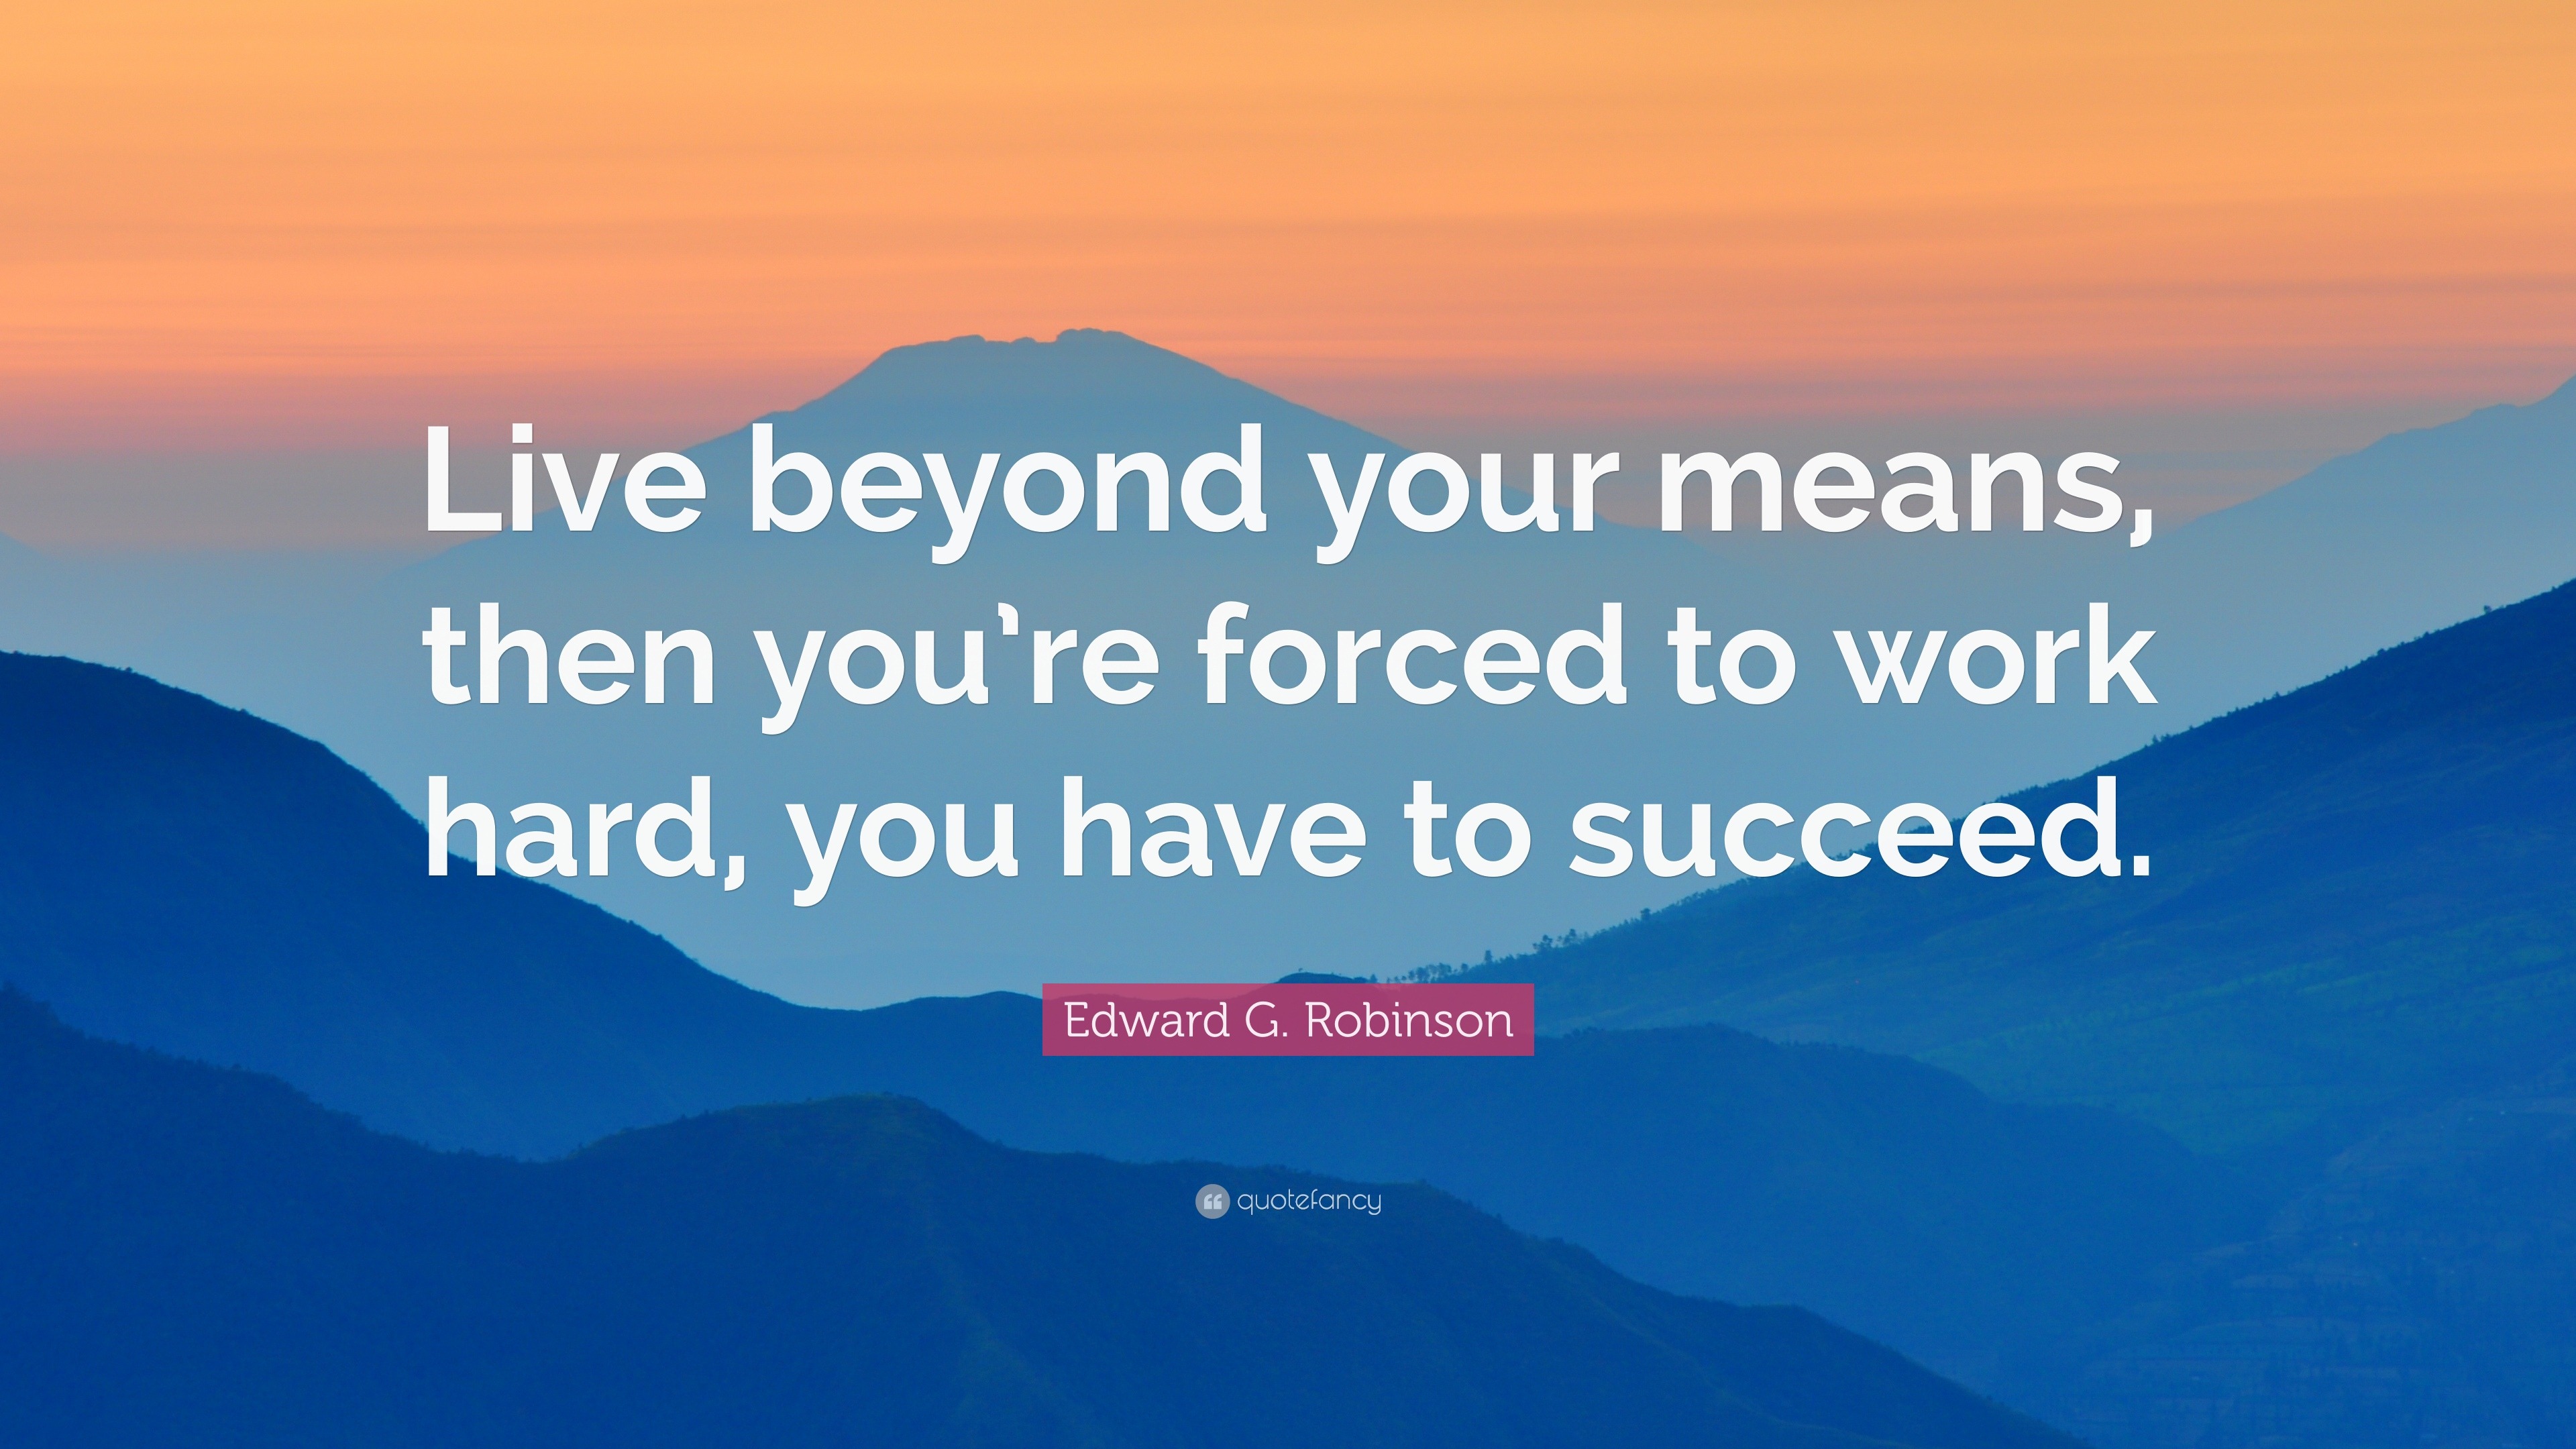 Edward G. Robinson Quote: “Live beyond your means, then you’re forced ...